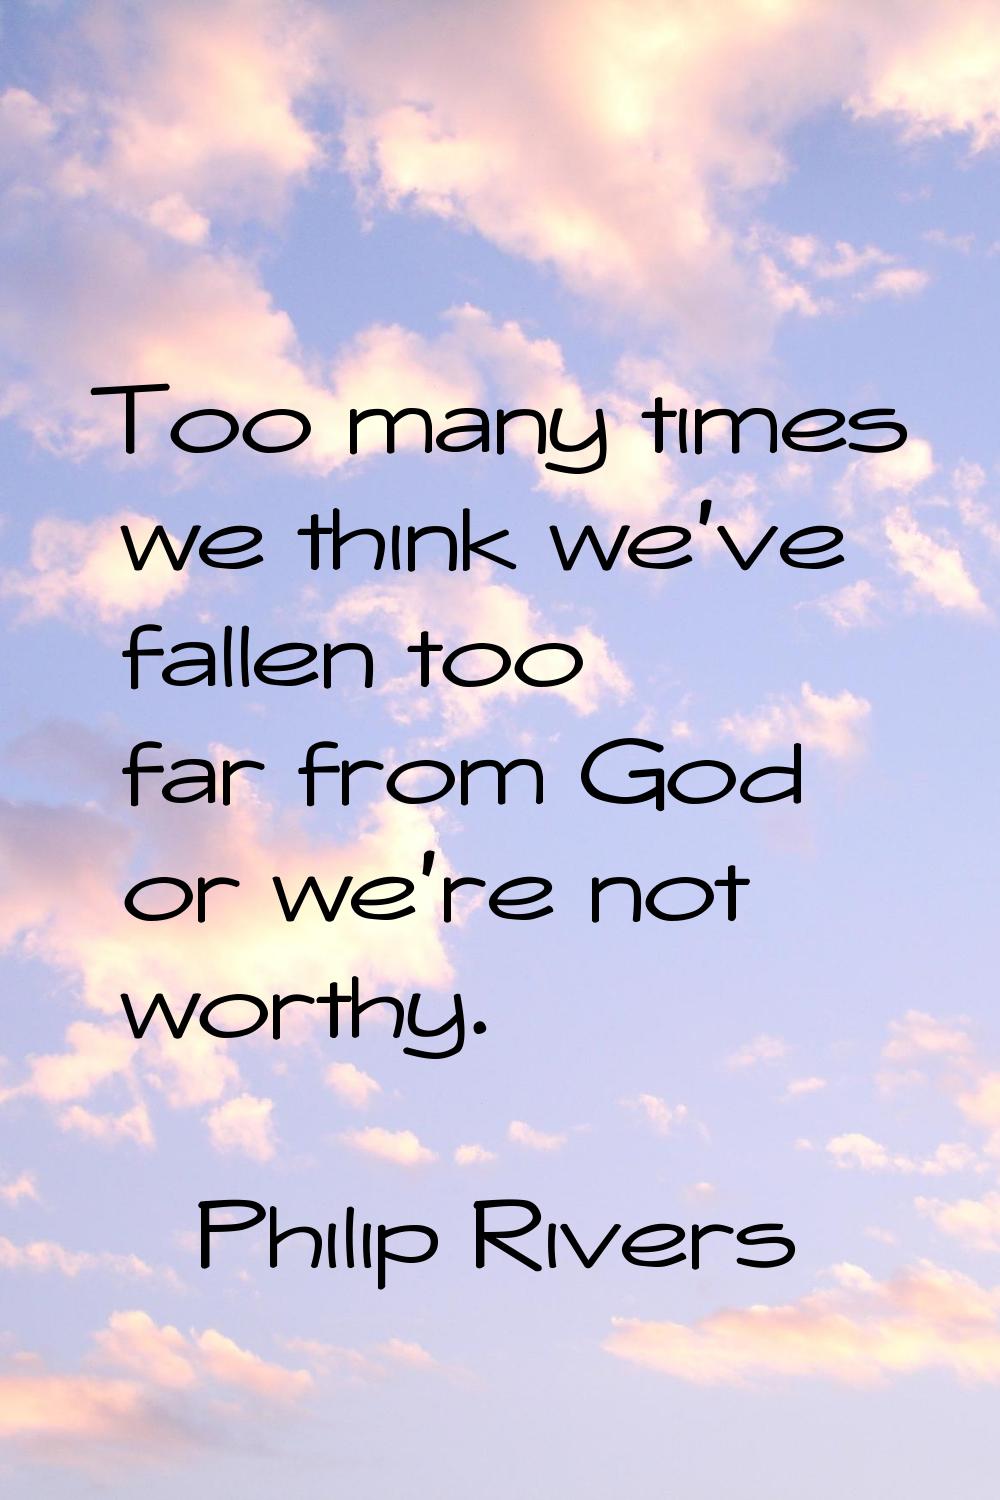 Too many times we think we've fallen too far from God or we're not worthy.